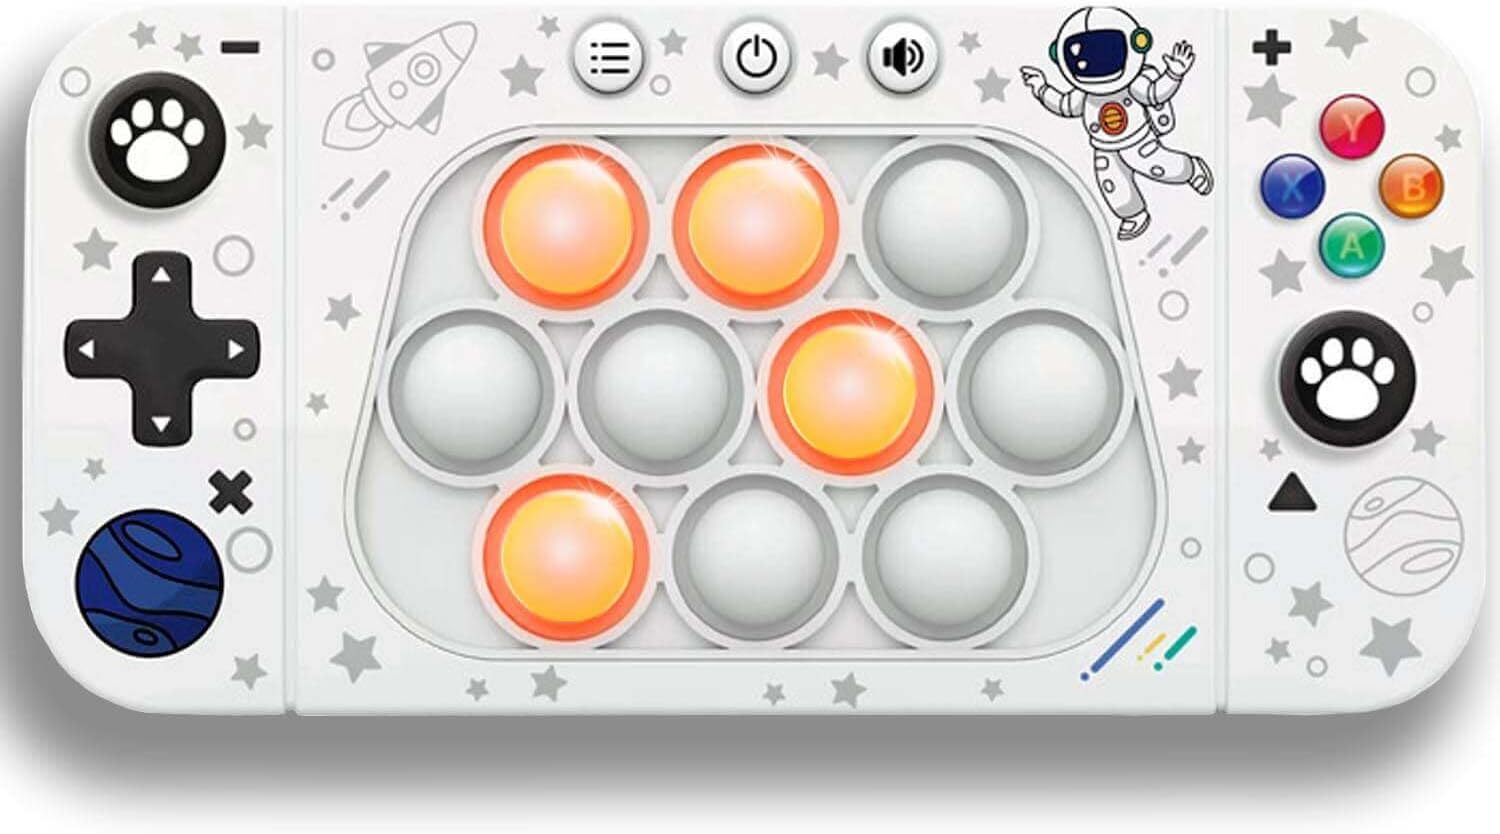 Fast Push Handheld Game, Pop Light Up Game Toys Upgraded Version 2, Lightly Push to Turn Off The Lit Bubbles.Fidget Sensory Toys for 6 7 8 9 Year Old Kids Boys & Girls & Teens Birthday Gifts